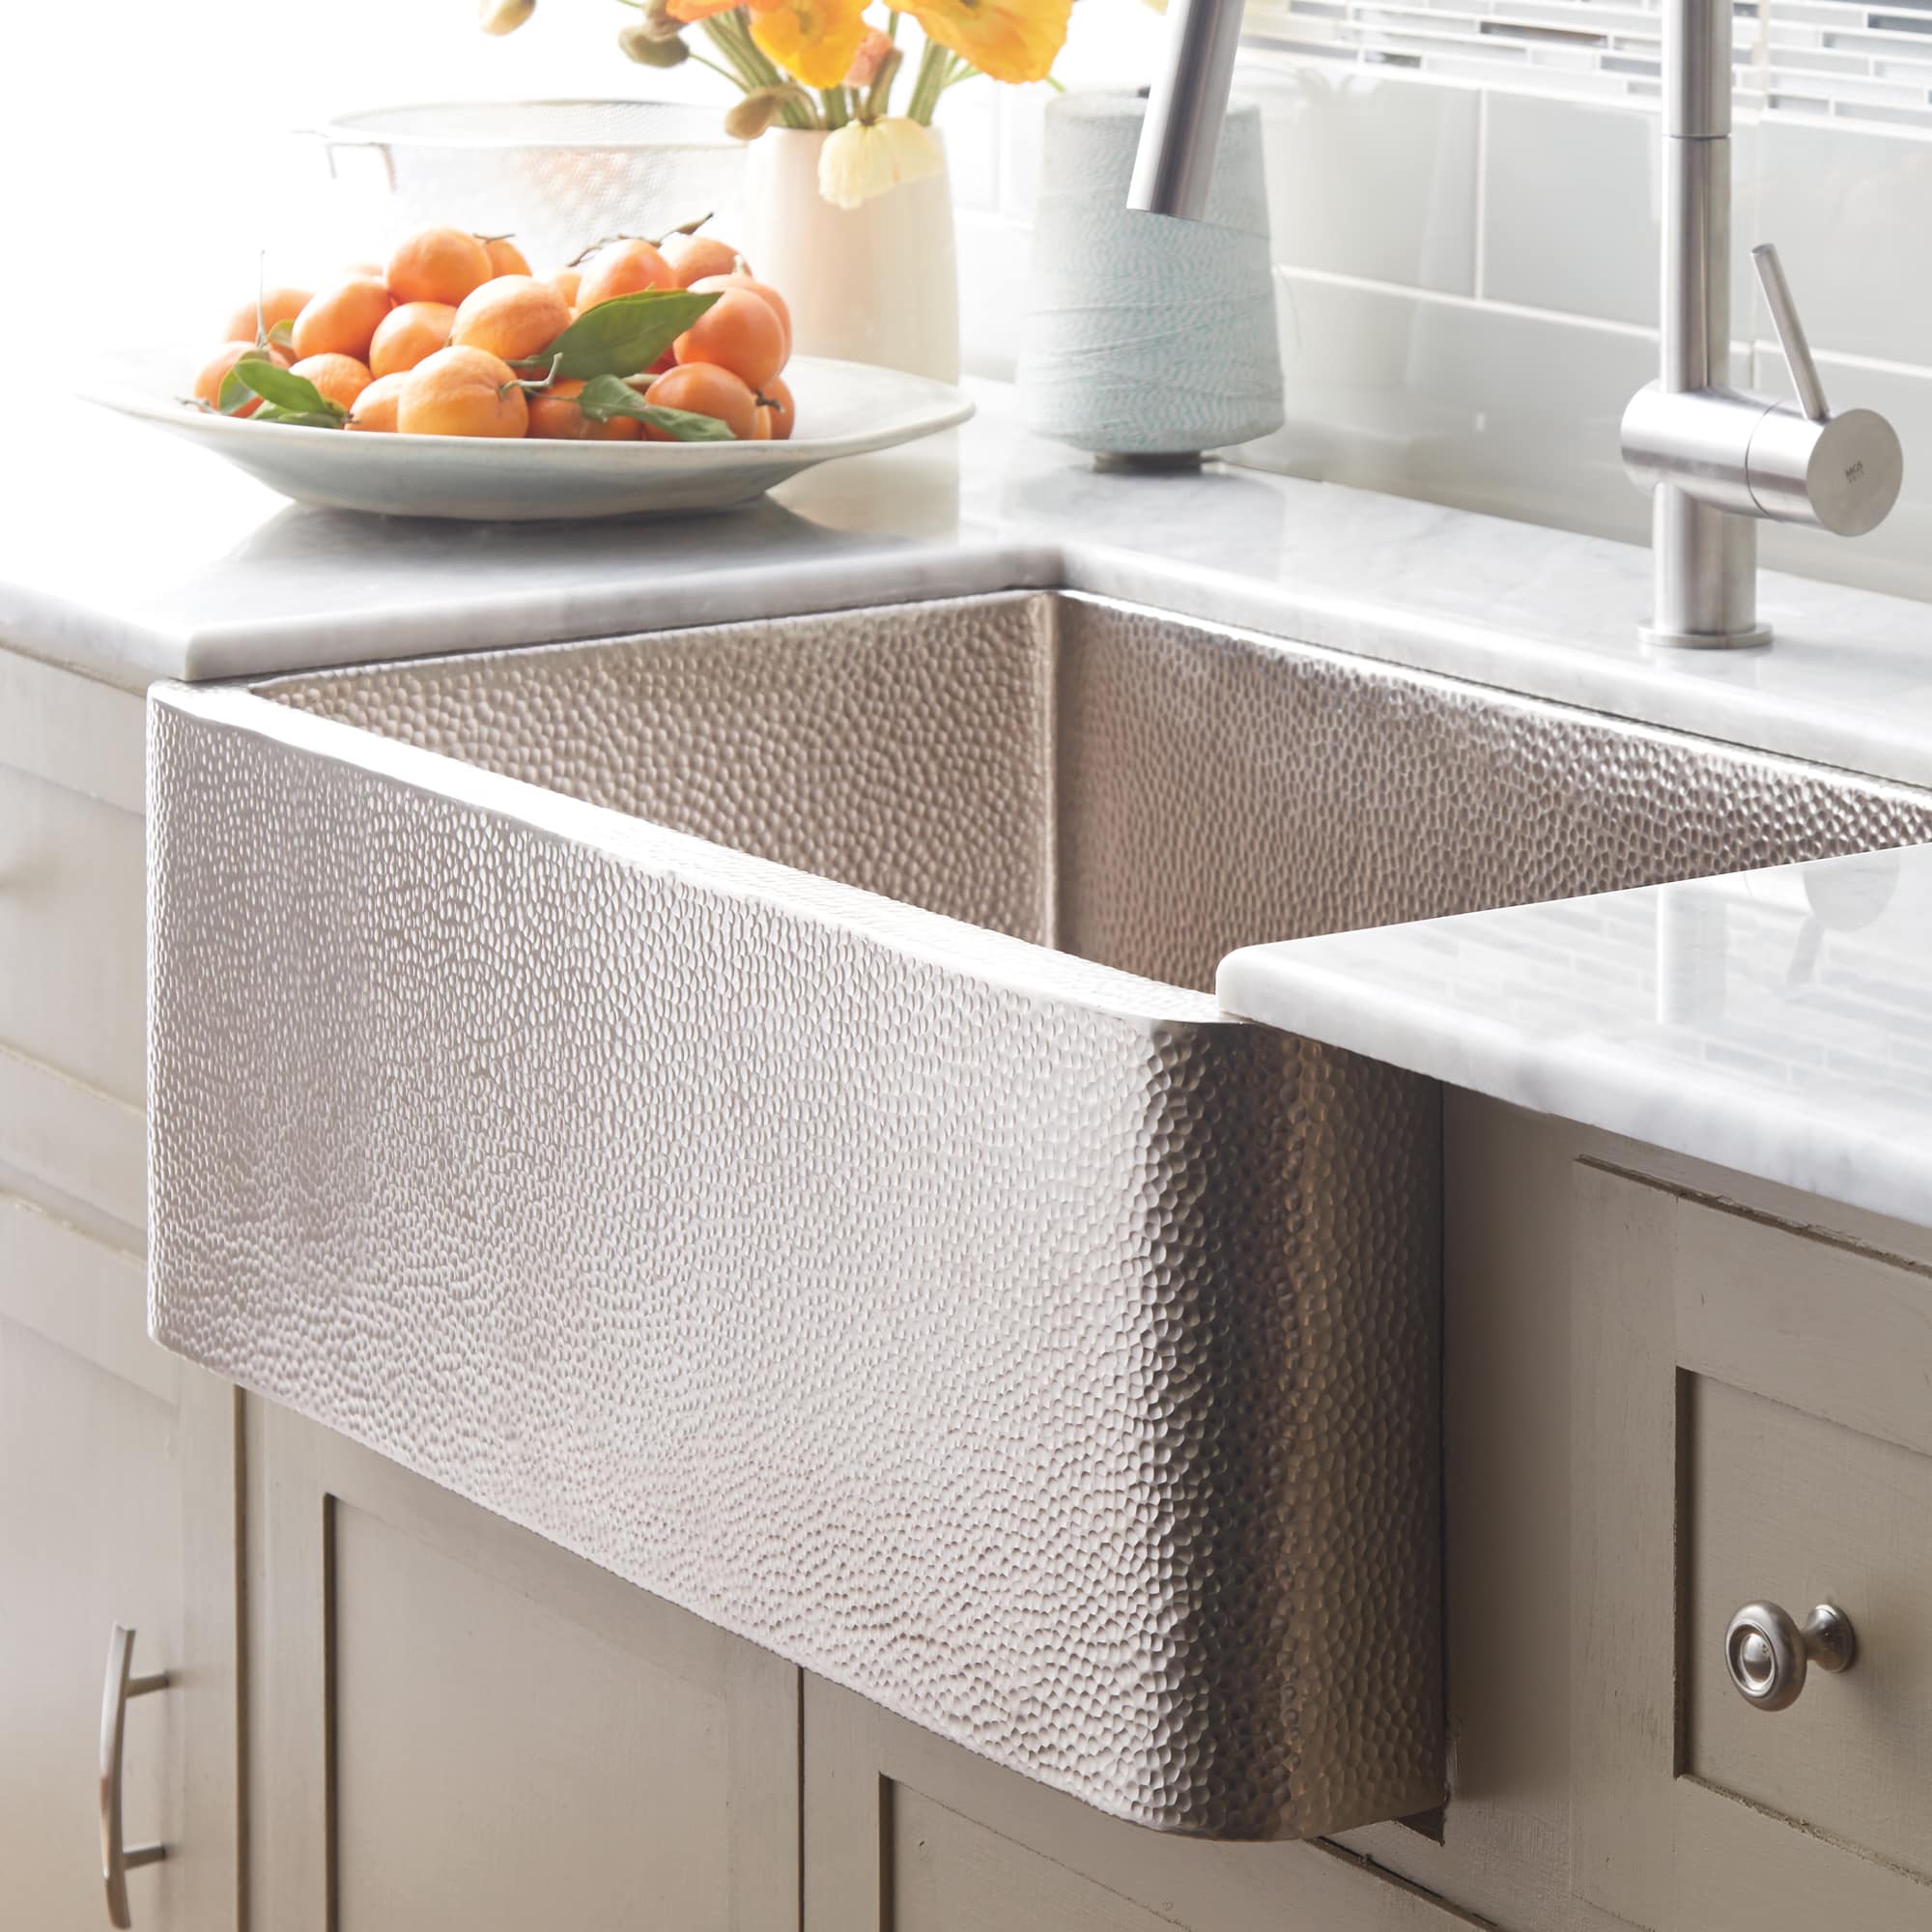 Native Trails 30 Nickel Farmhouse Sink, Brushed Nickel, CPK594